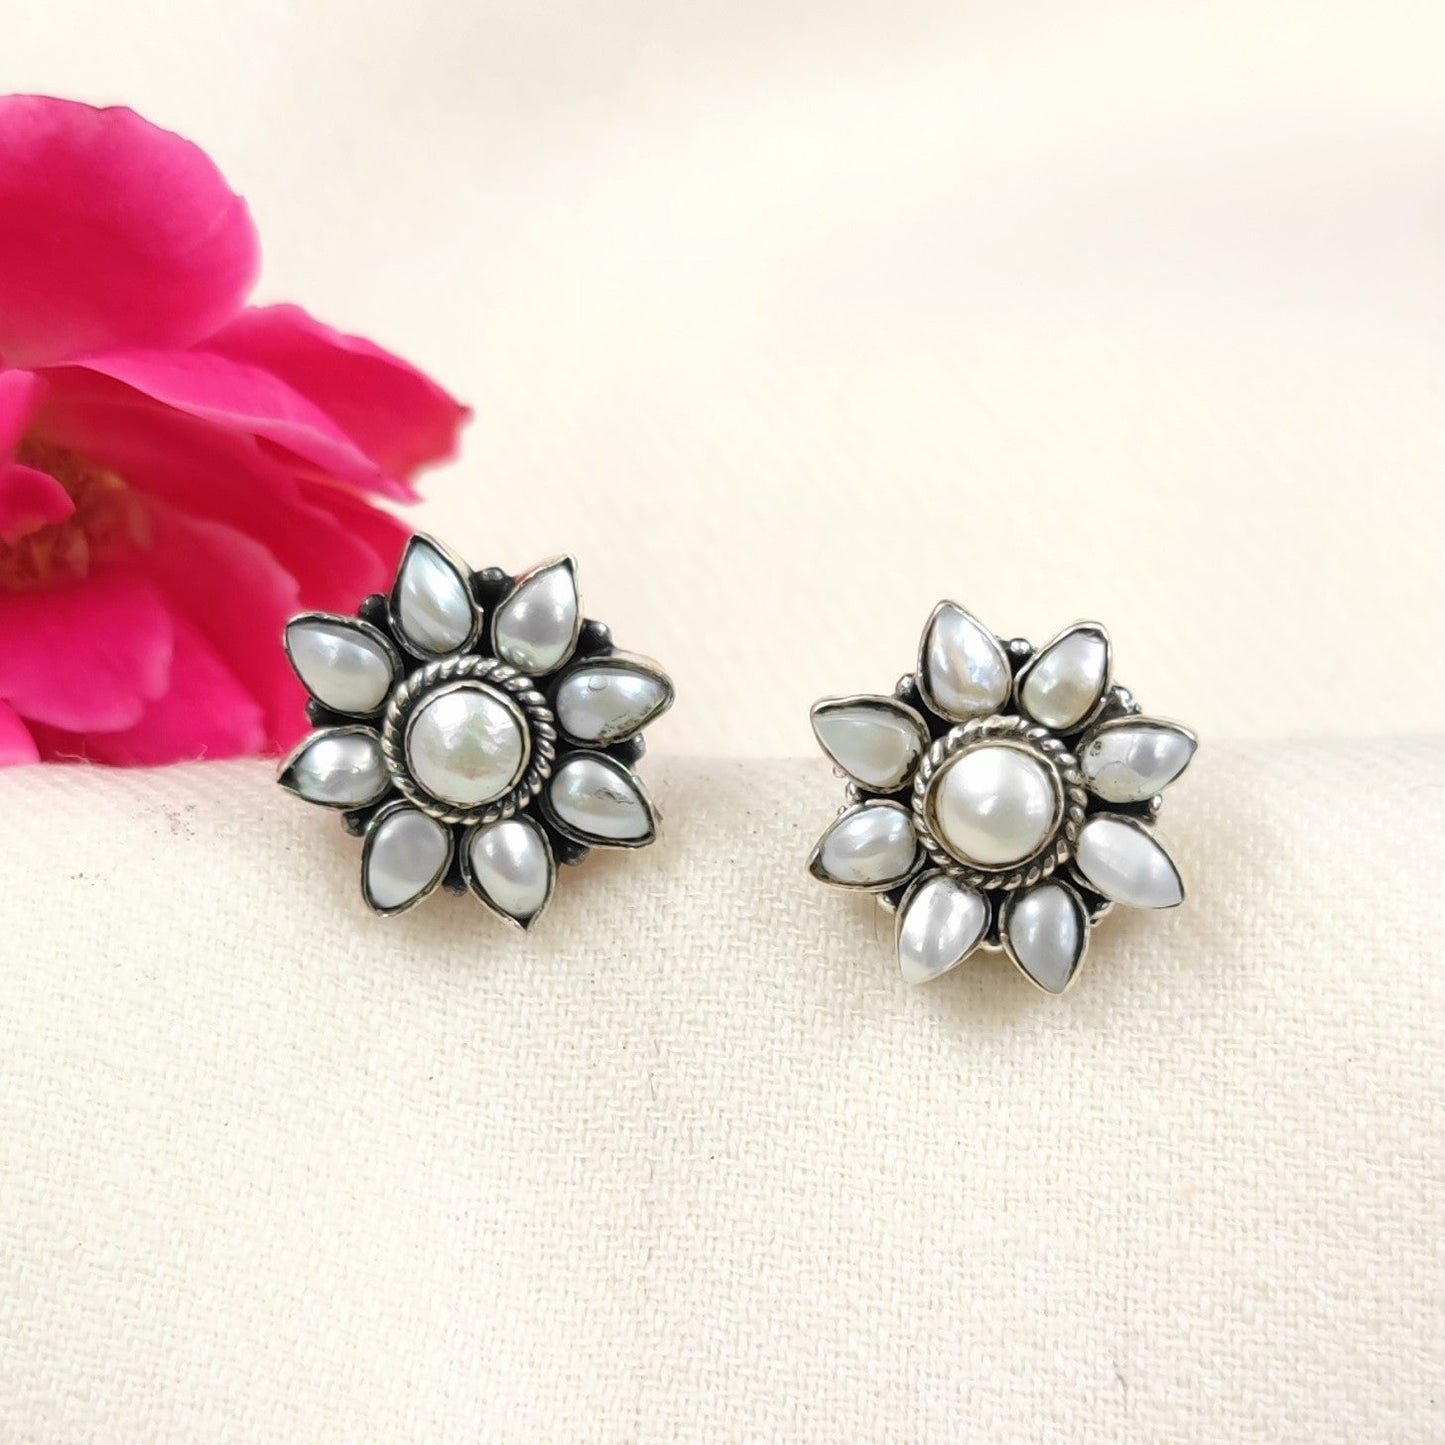 Silver Jewelry Earrings by Jauhri 92.5 Silver - Pearl Pushpa Studs